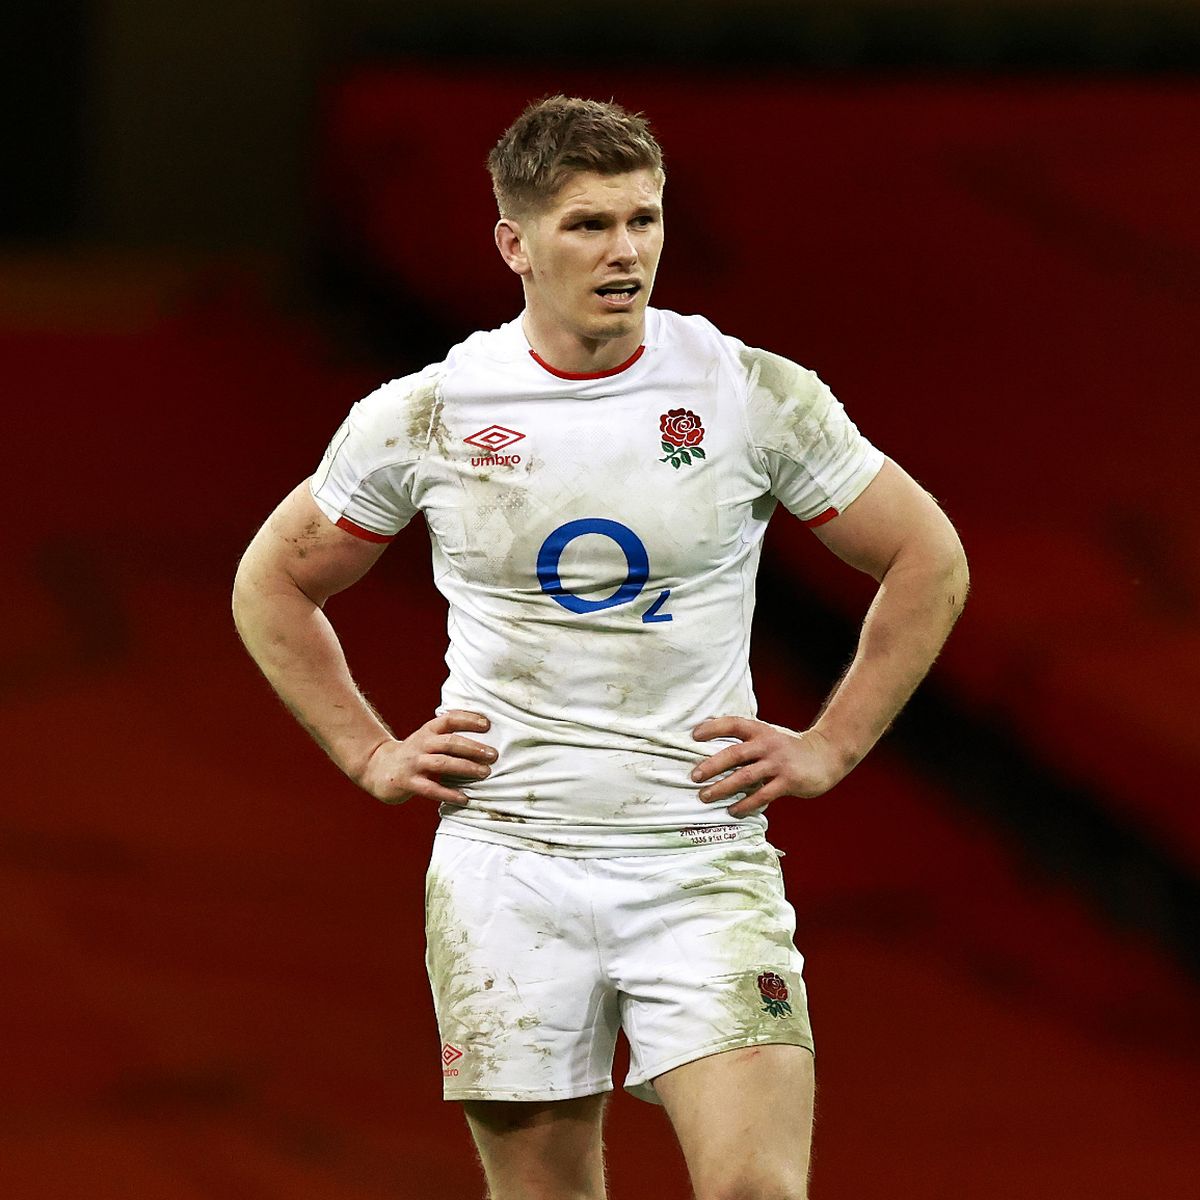 Owen Farrell suffers fresh injury setback to put his Six Nations hopes in serious jeopardy